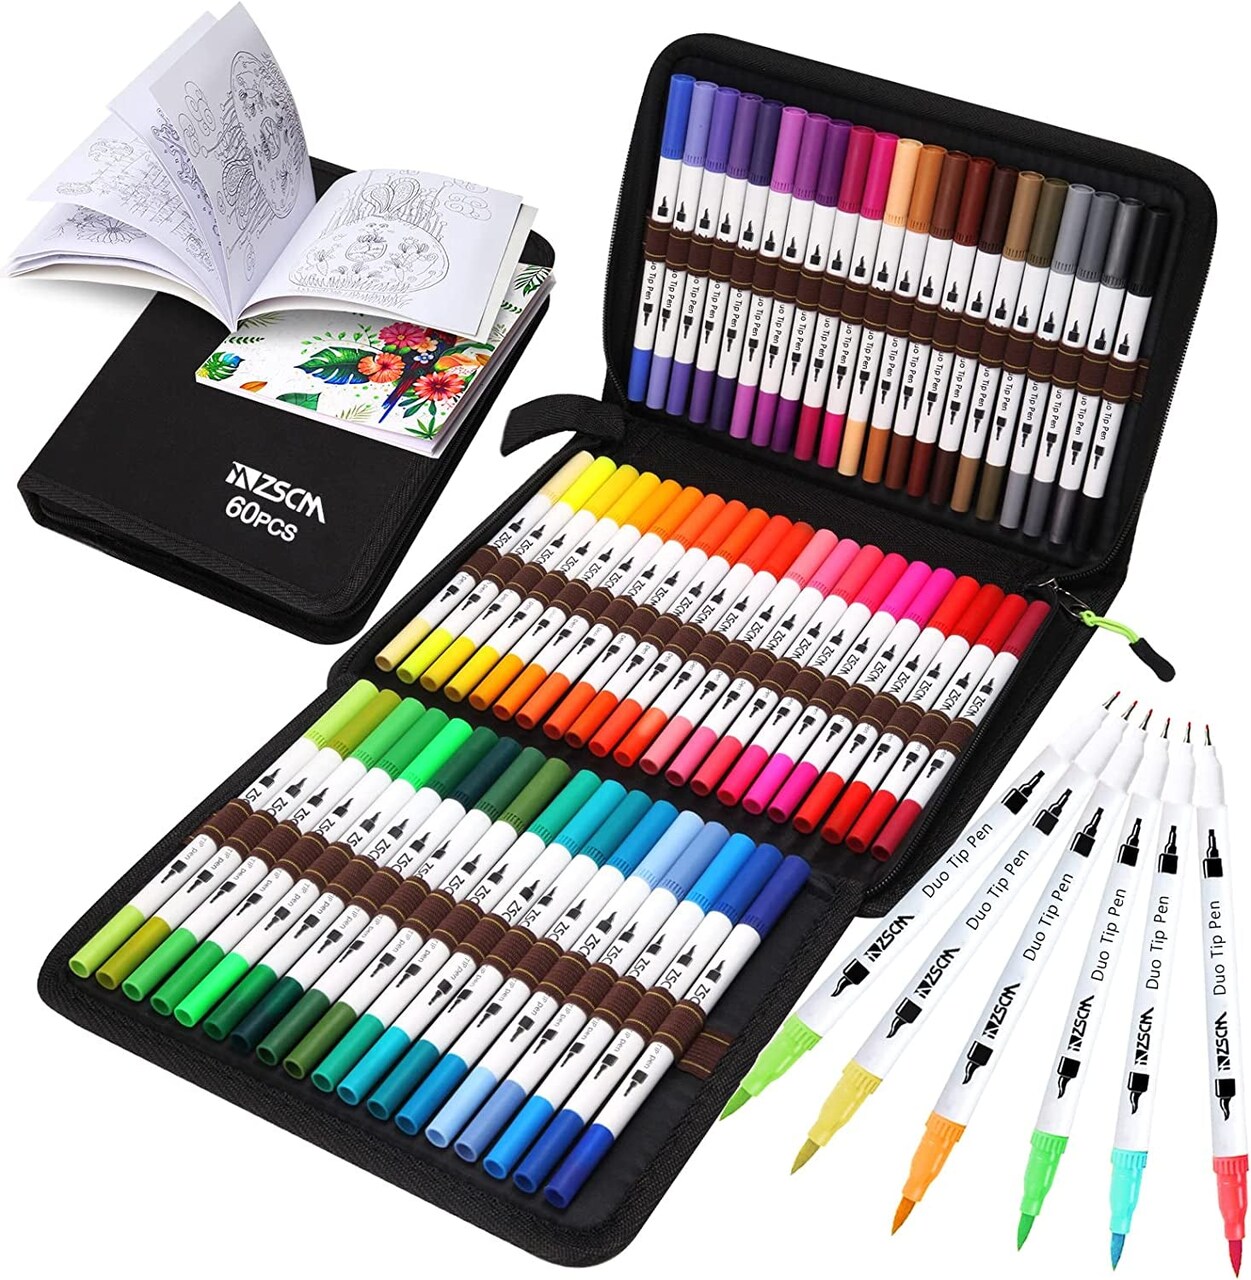 ZSCM Duo Tip Brush Coloring Pens,60 Colors Art Markers,Fine & Brush Tip Pen  for Kids Adults Coloring Book Bullet Journals Planner Writing Drawing Note  Taking, Include Brush Lettering Calligraphy